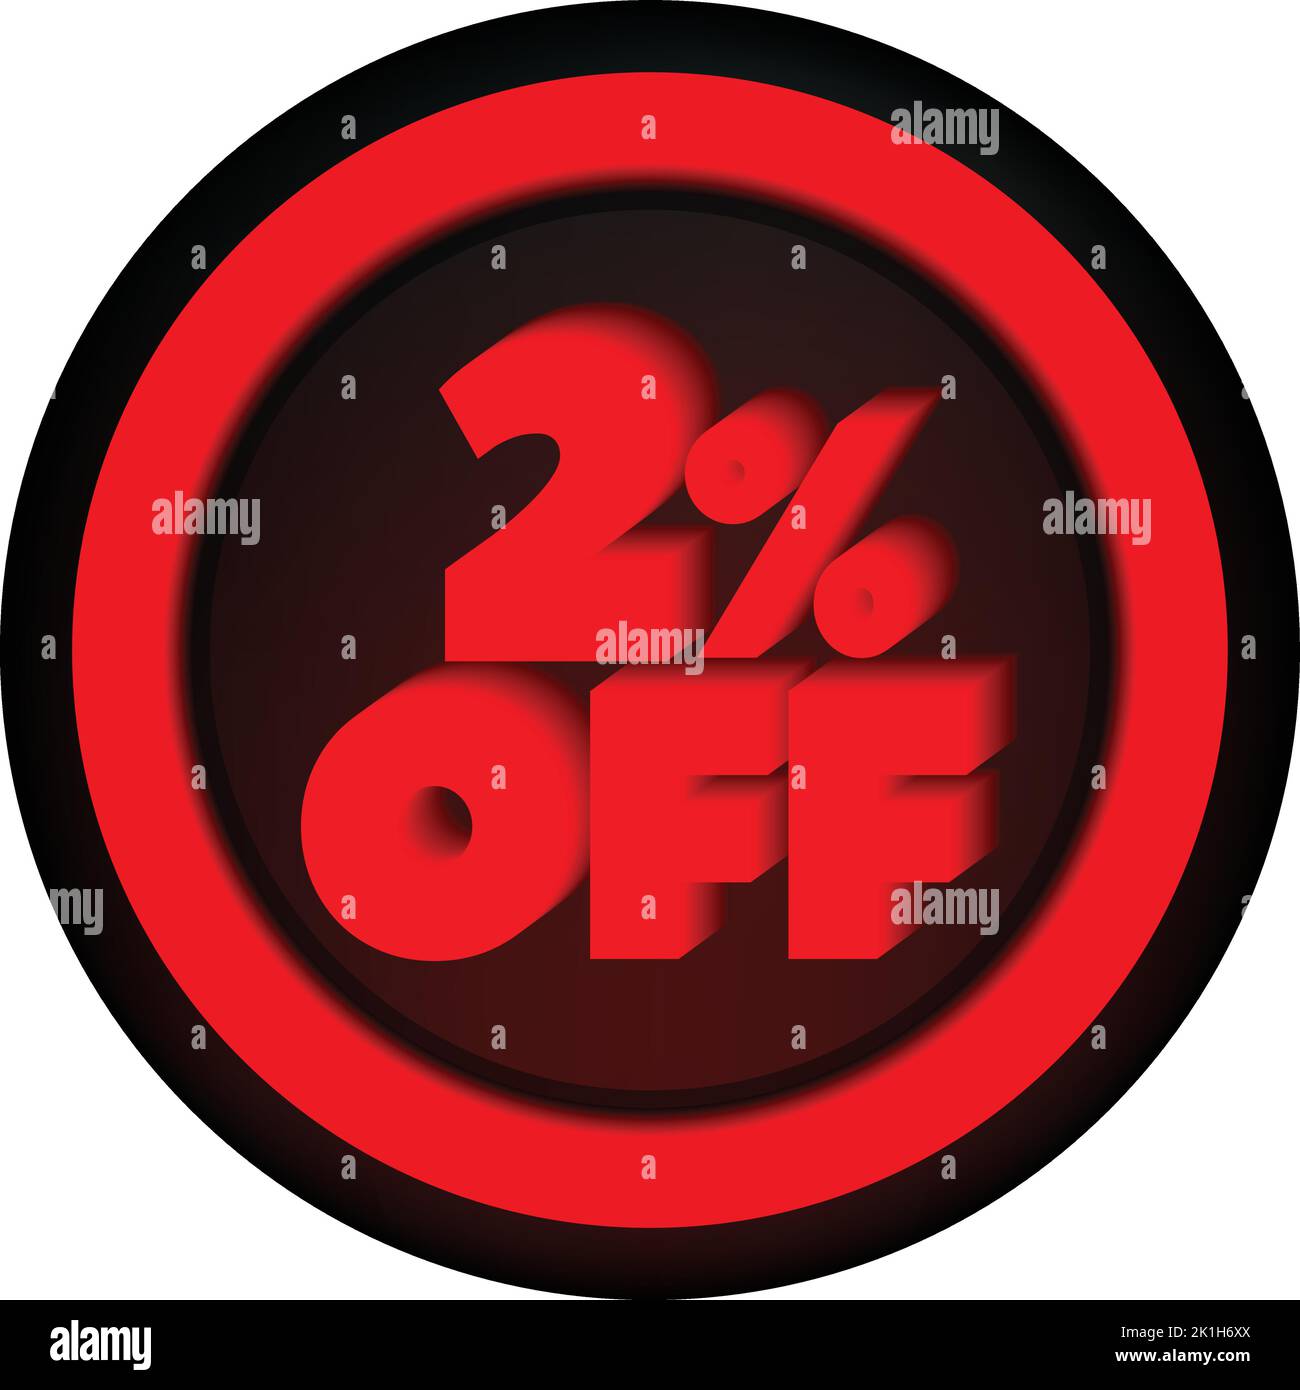 TAG 2 PERCENT DISCOUNT BUTTON BLACK FRIDAY PROMOTION FOR BIG SALES Stock Vector